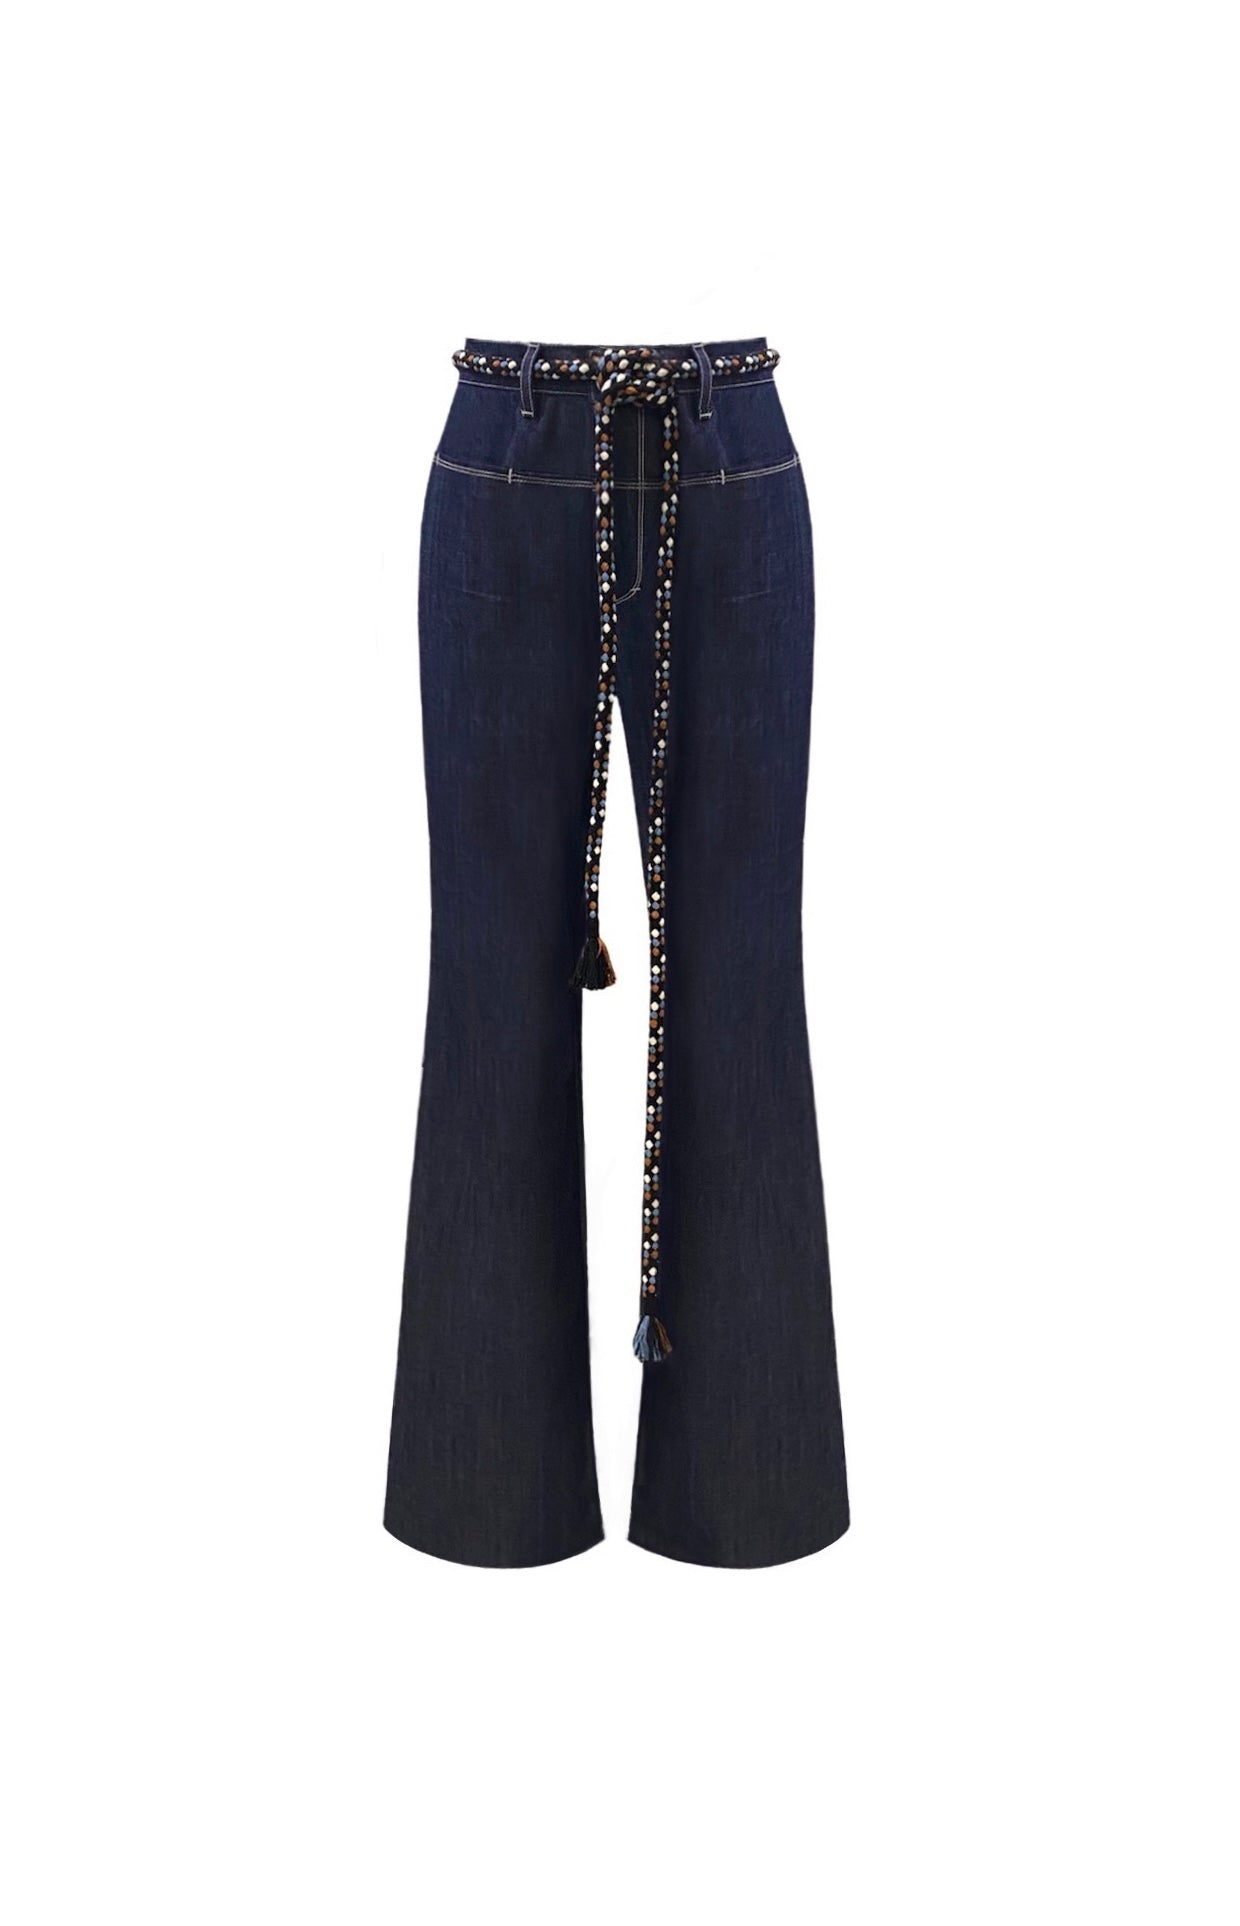 FLARED JEANS AW/22